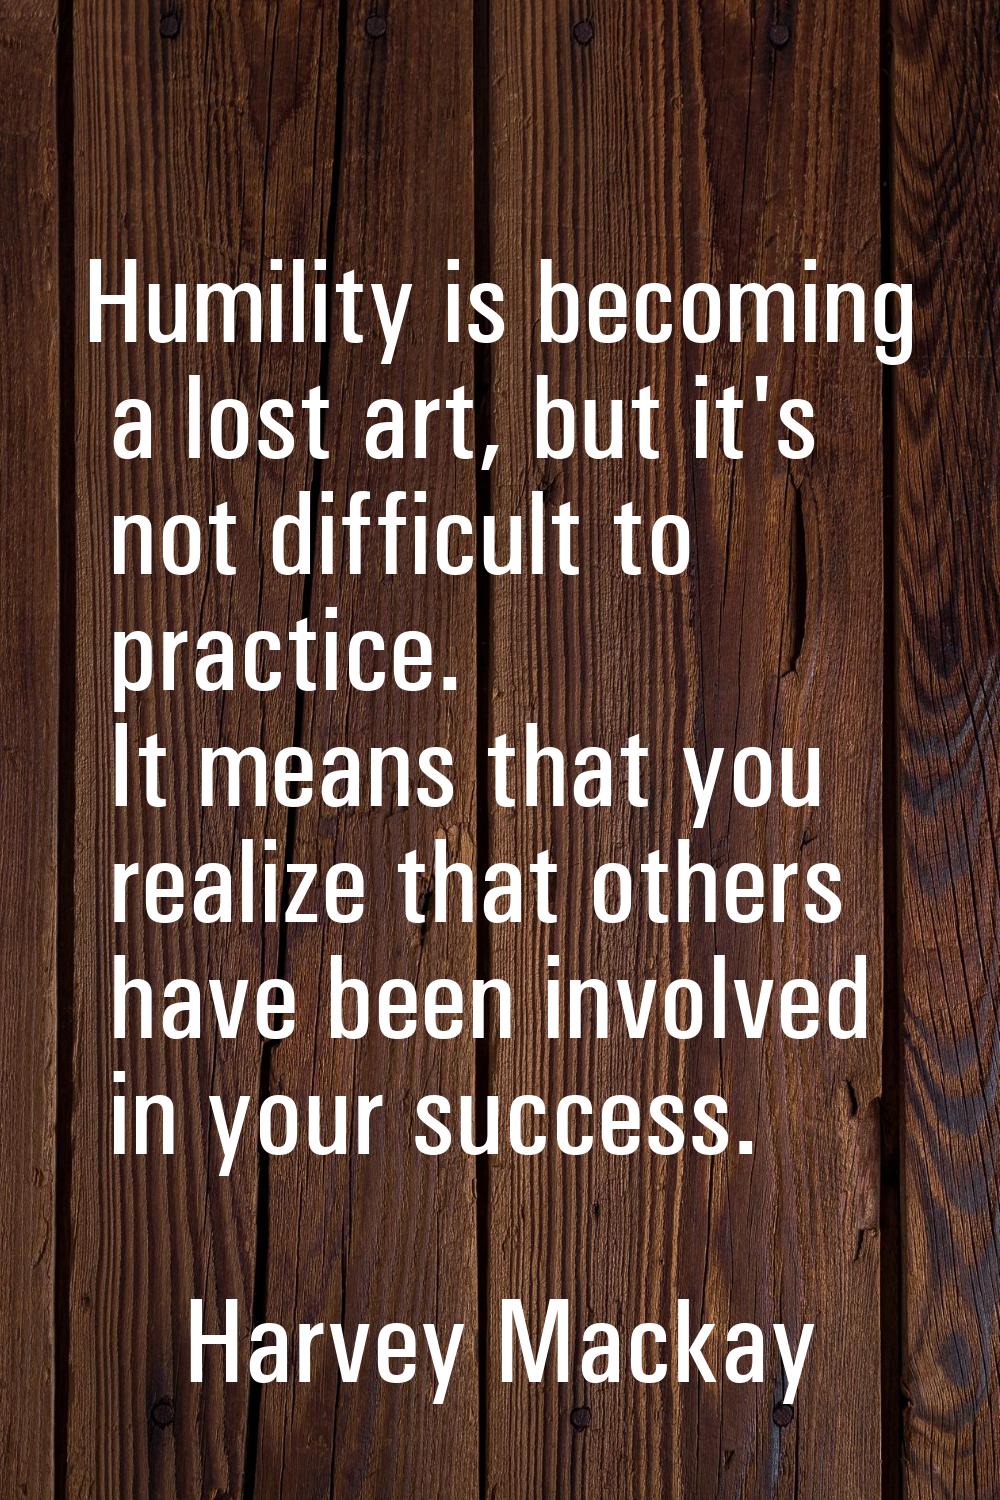 Humility is becoming a lost art, but it's not difficult to practice. It means that you realize that